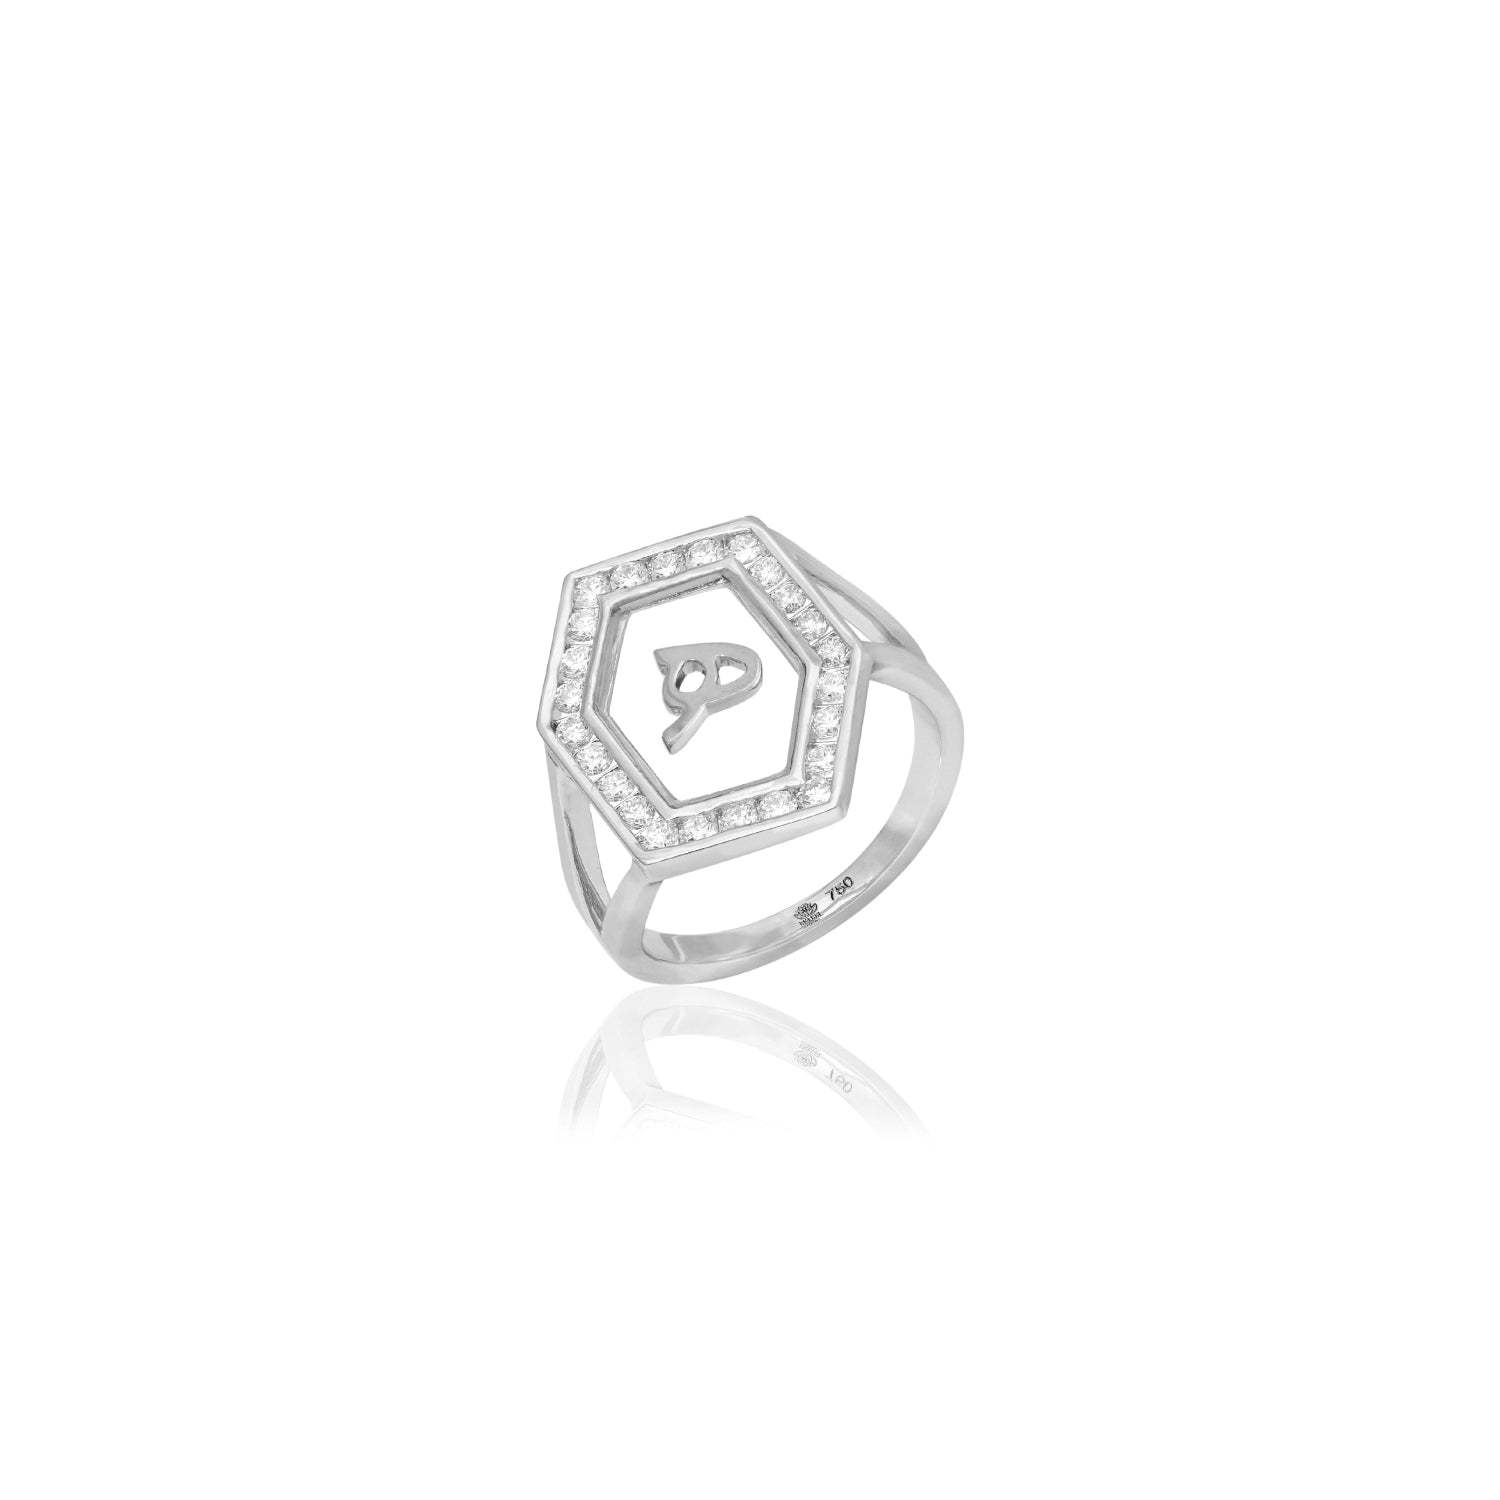 Qamoos 1.0 Letter هـ Diamond Ring in White Gold